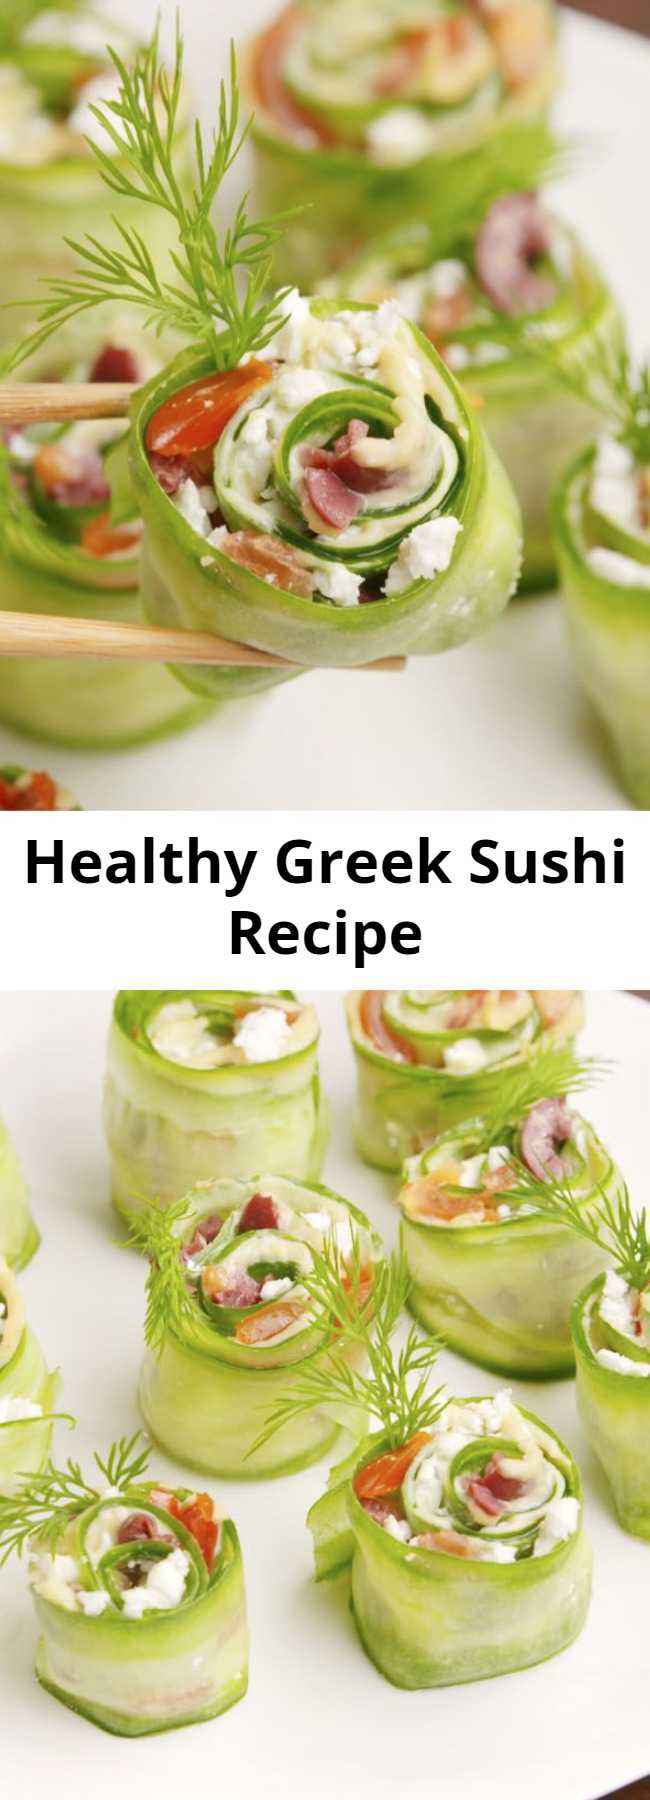 Healthy Greek Sushi Recipe - Get your chopsticks ready! #food #healthyeating #cleaneating #gf #glutenfree